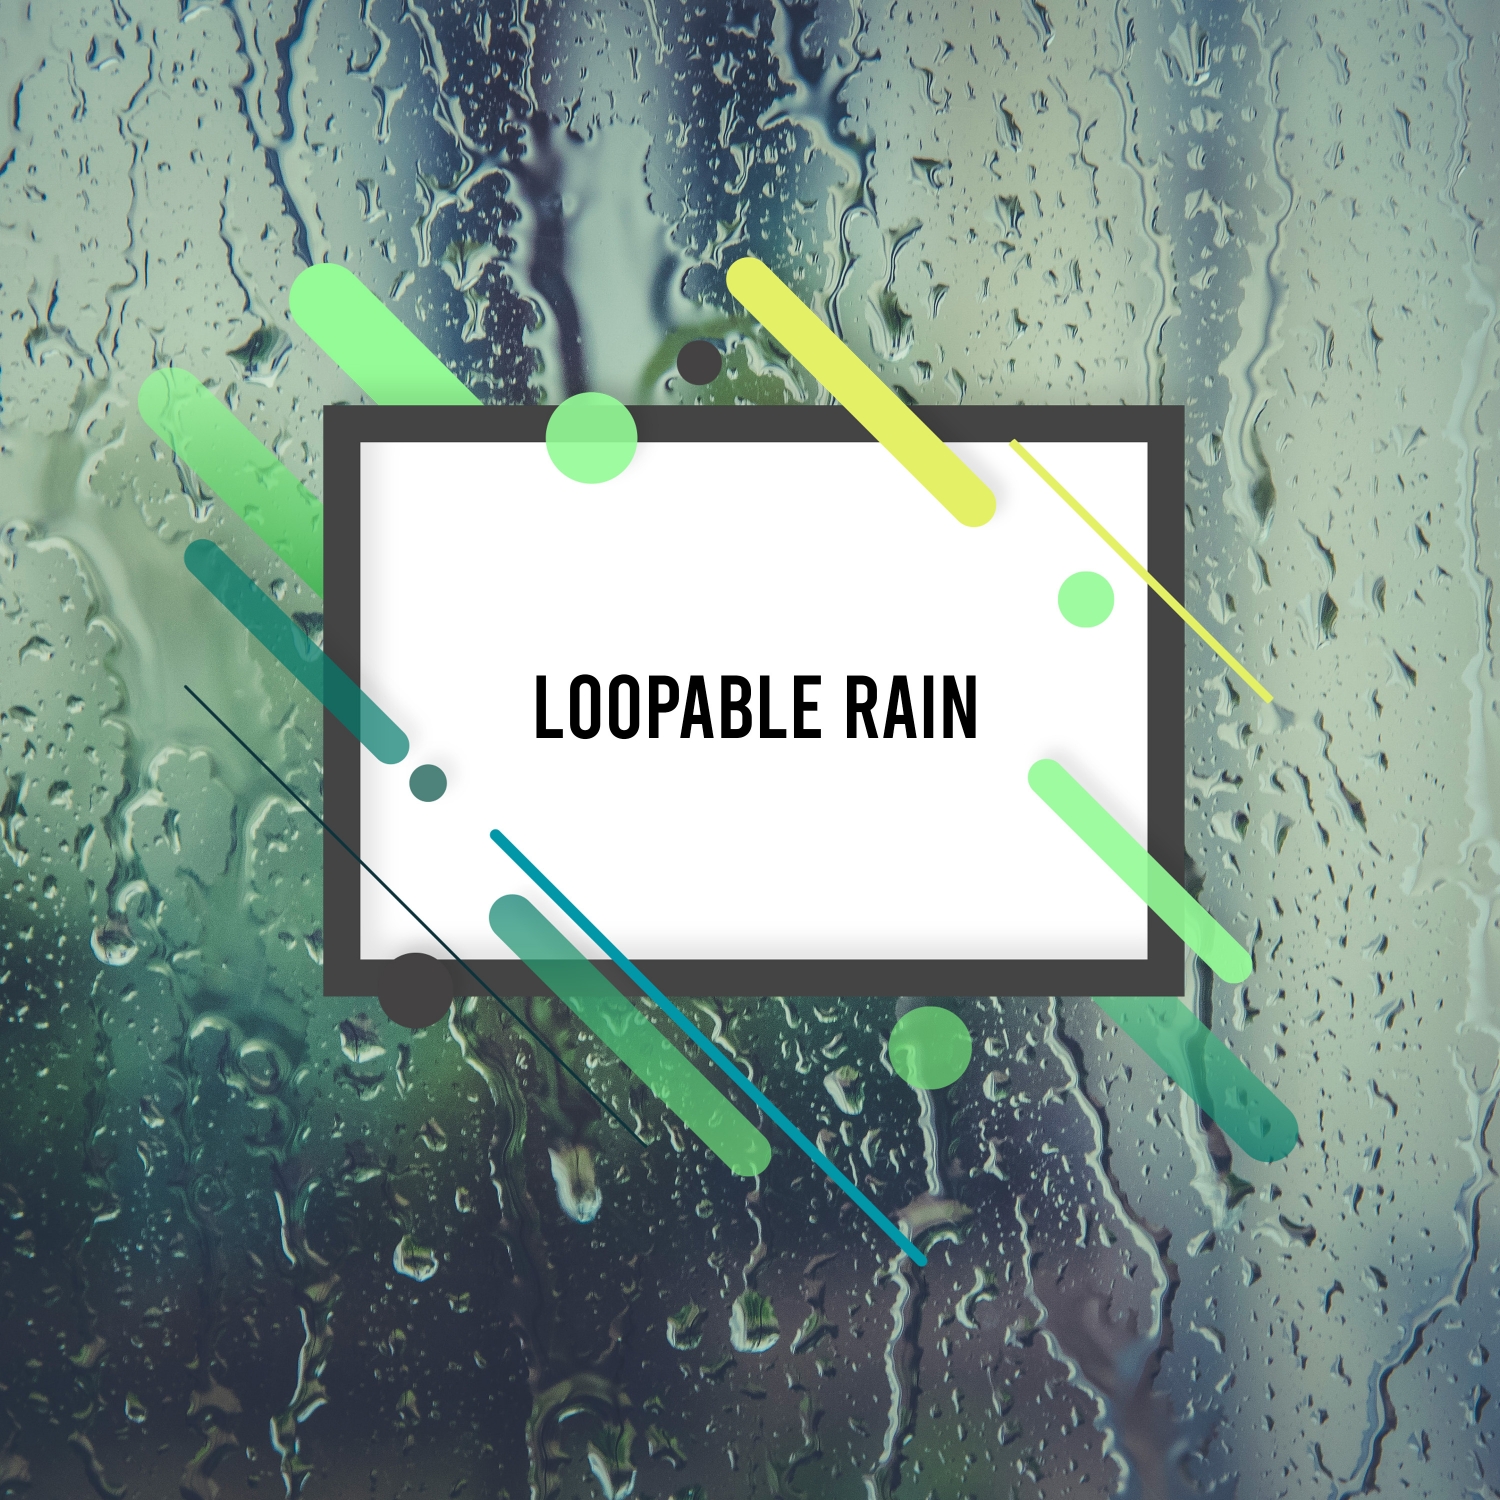 17 Ambient Loopable Nature and Rain Sounds